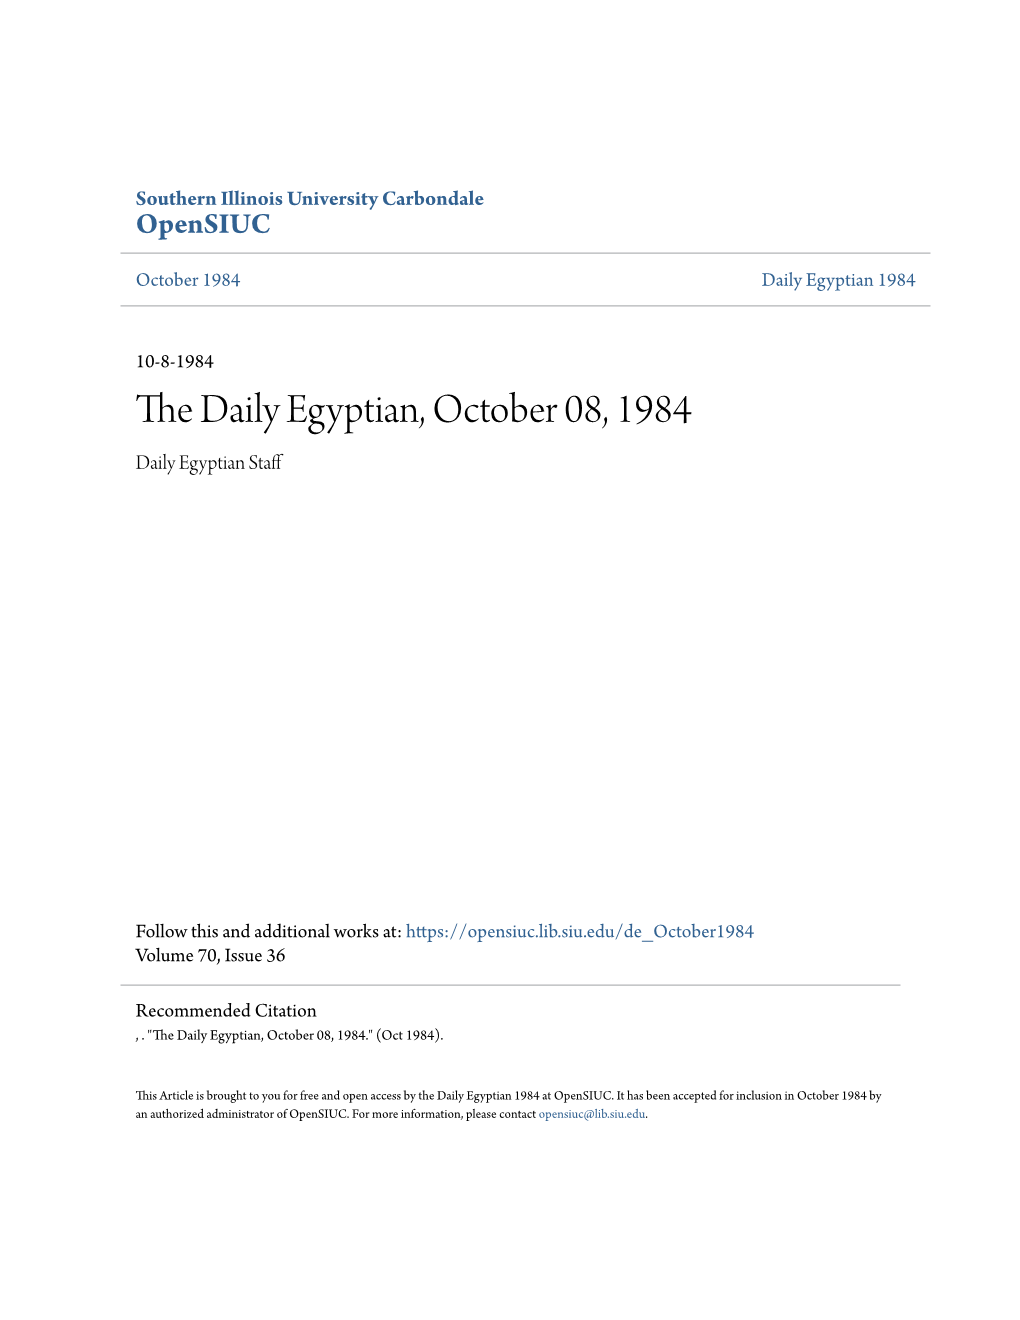 The Daily Egyptian, October 08, 1984